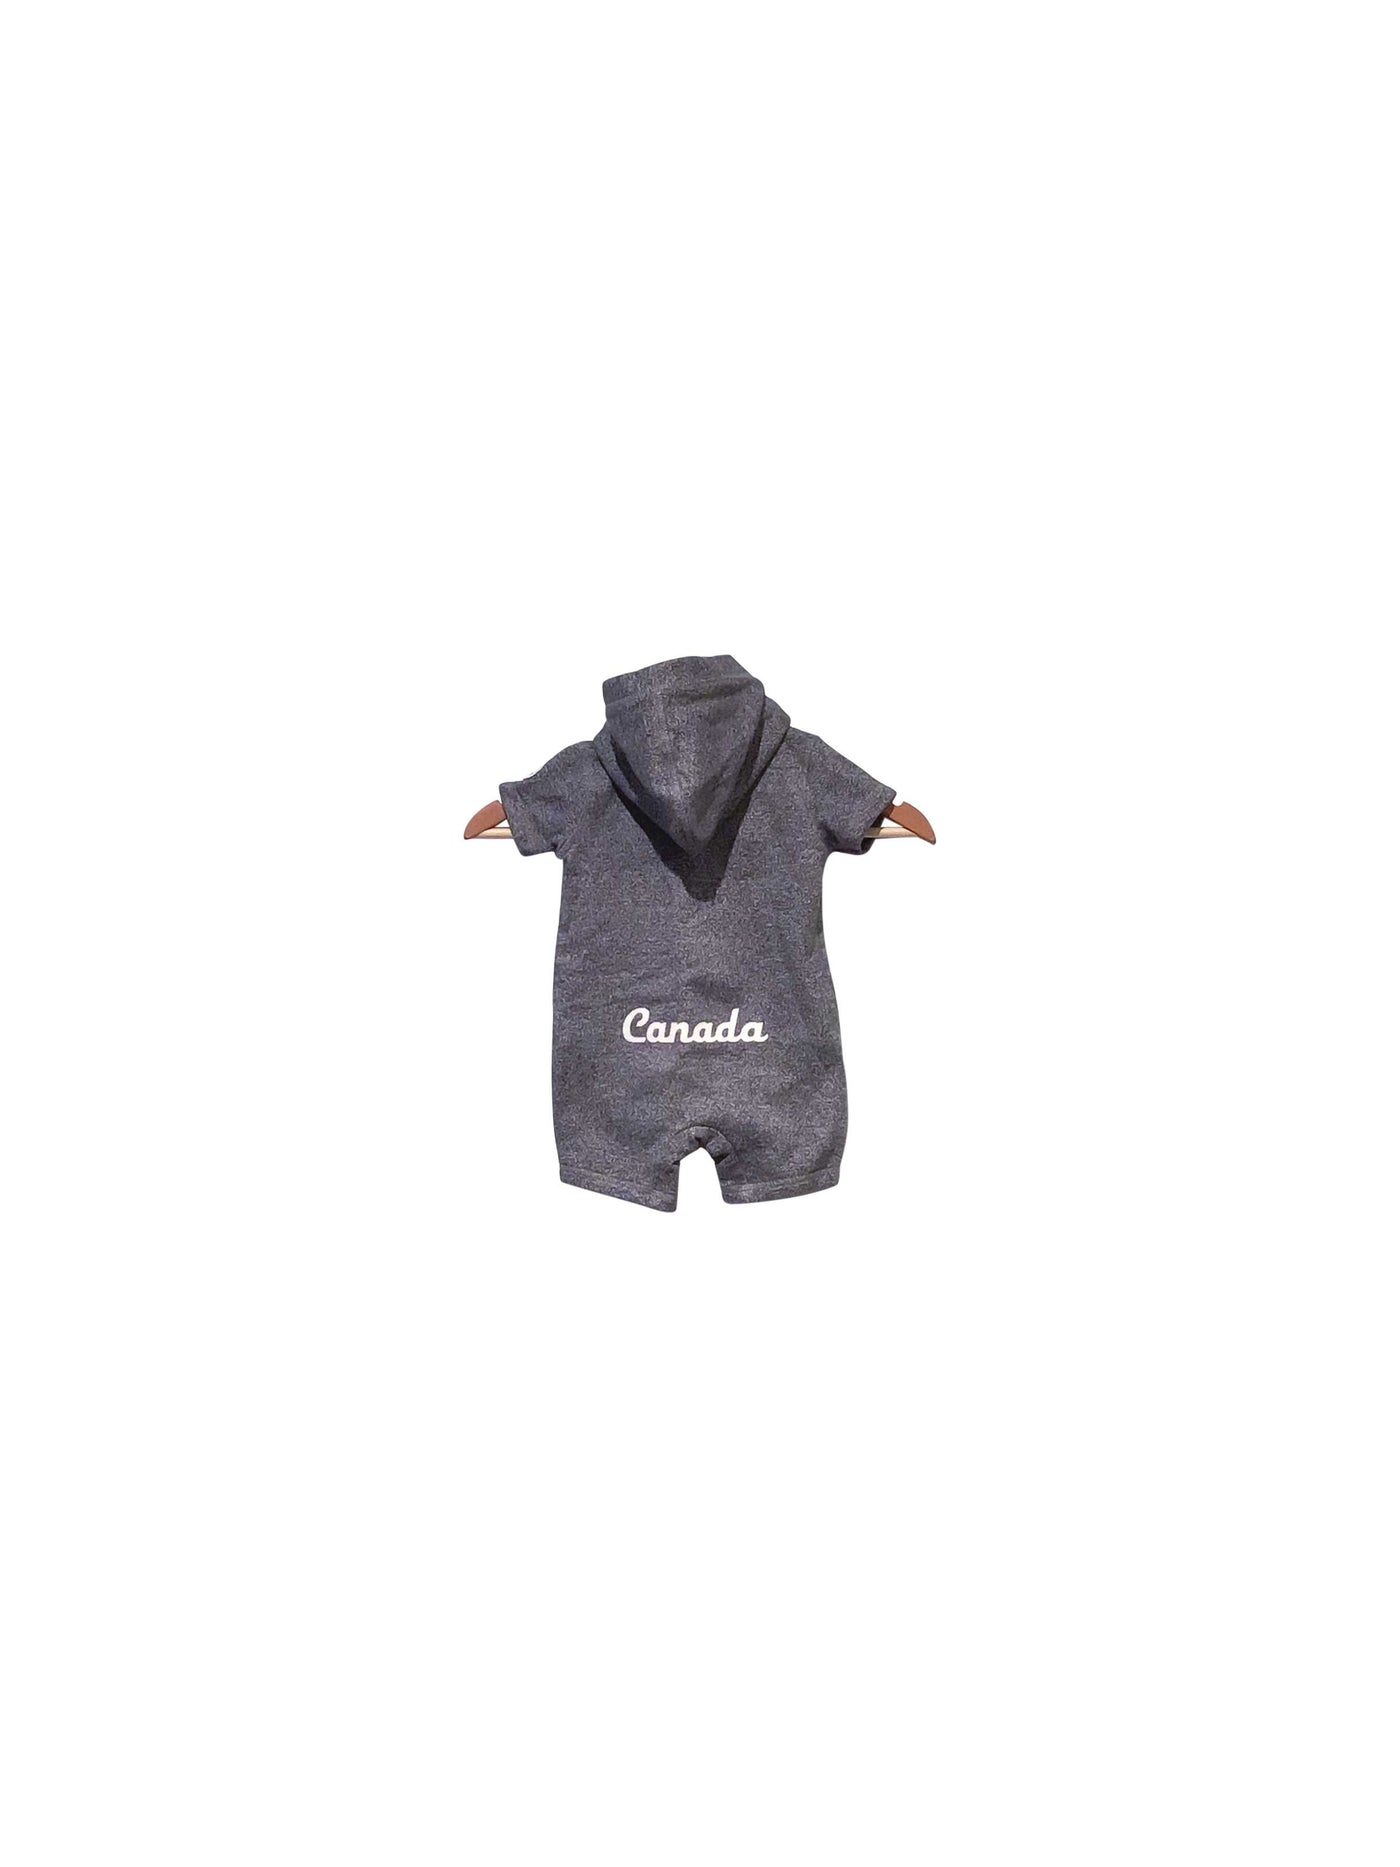 CANADIANA Regular fit Overalls in Gray  -  3-6M